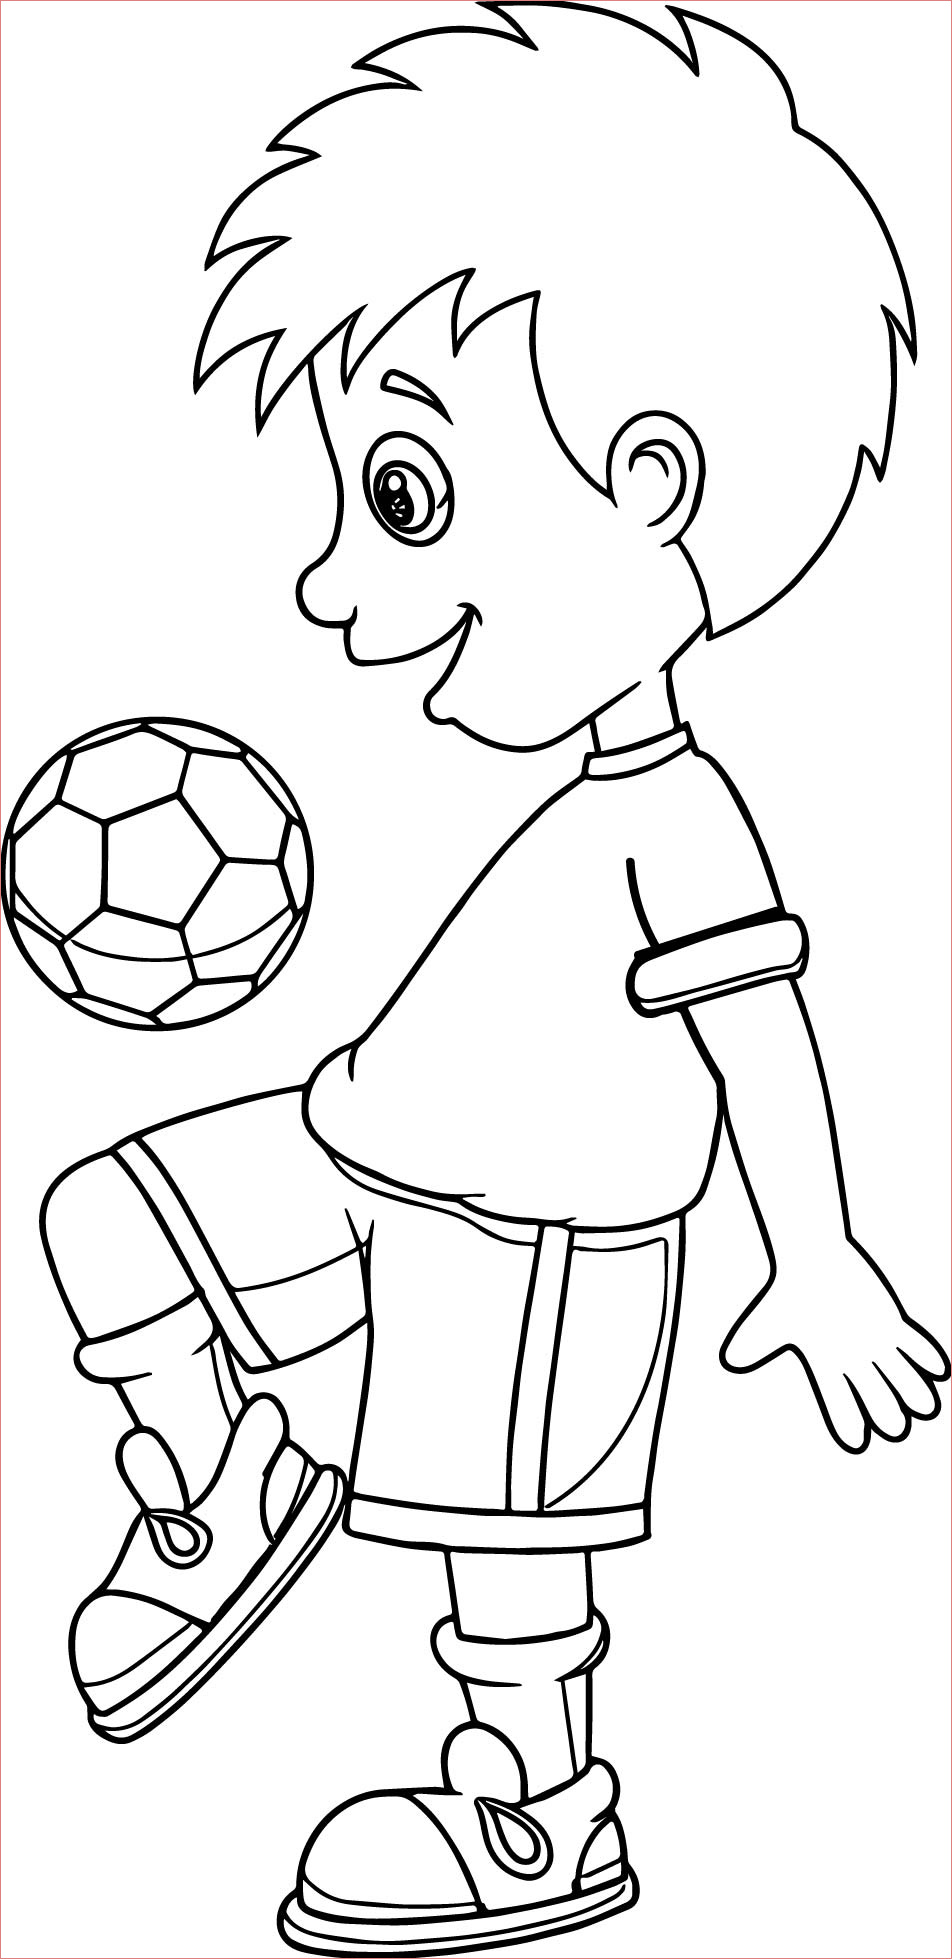 balls bounce playing football coloring page